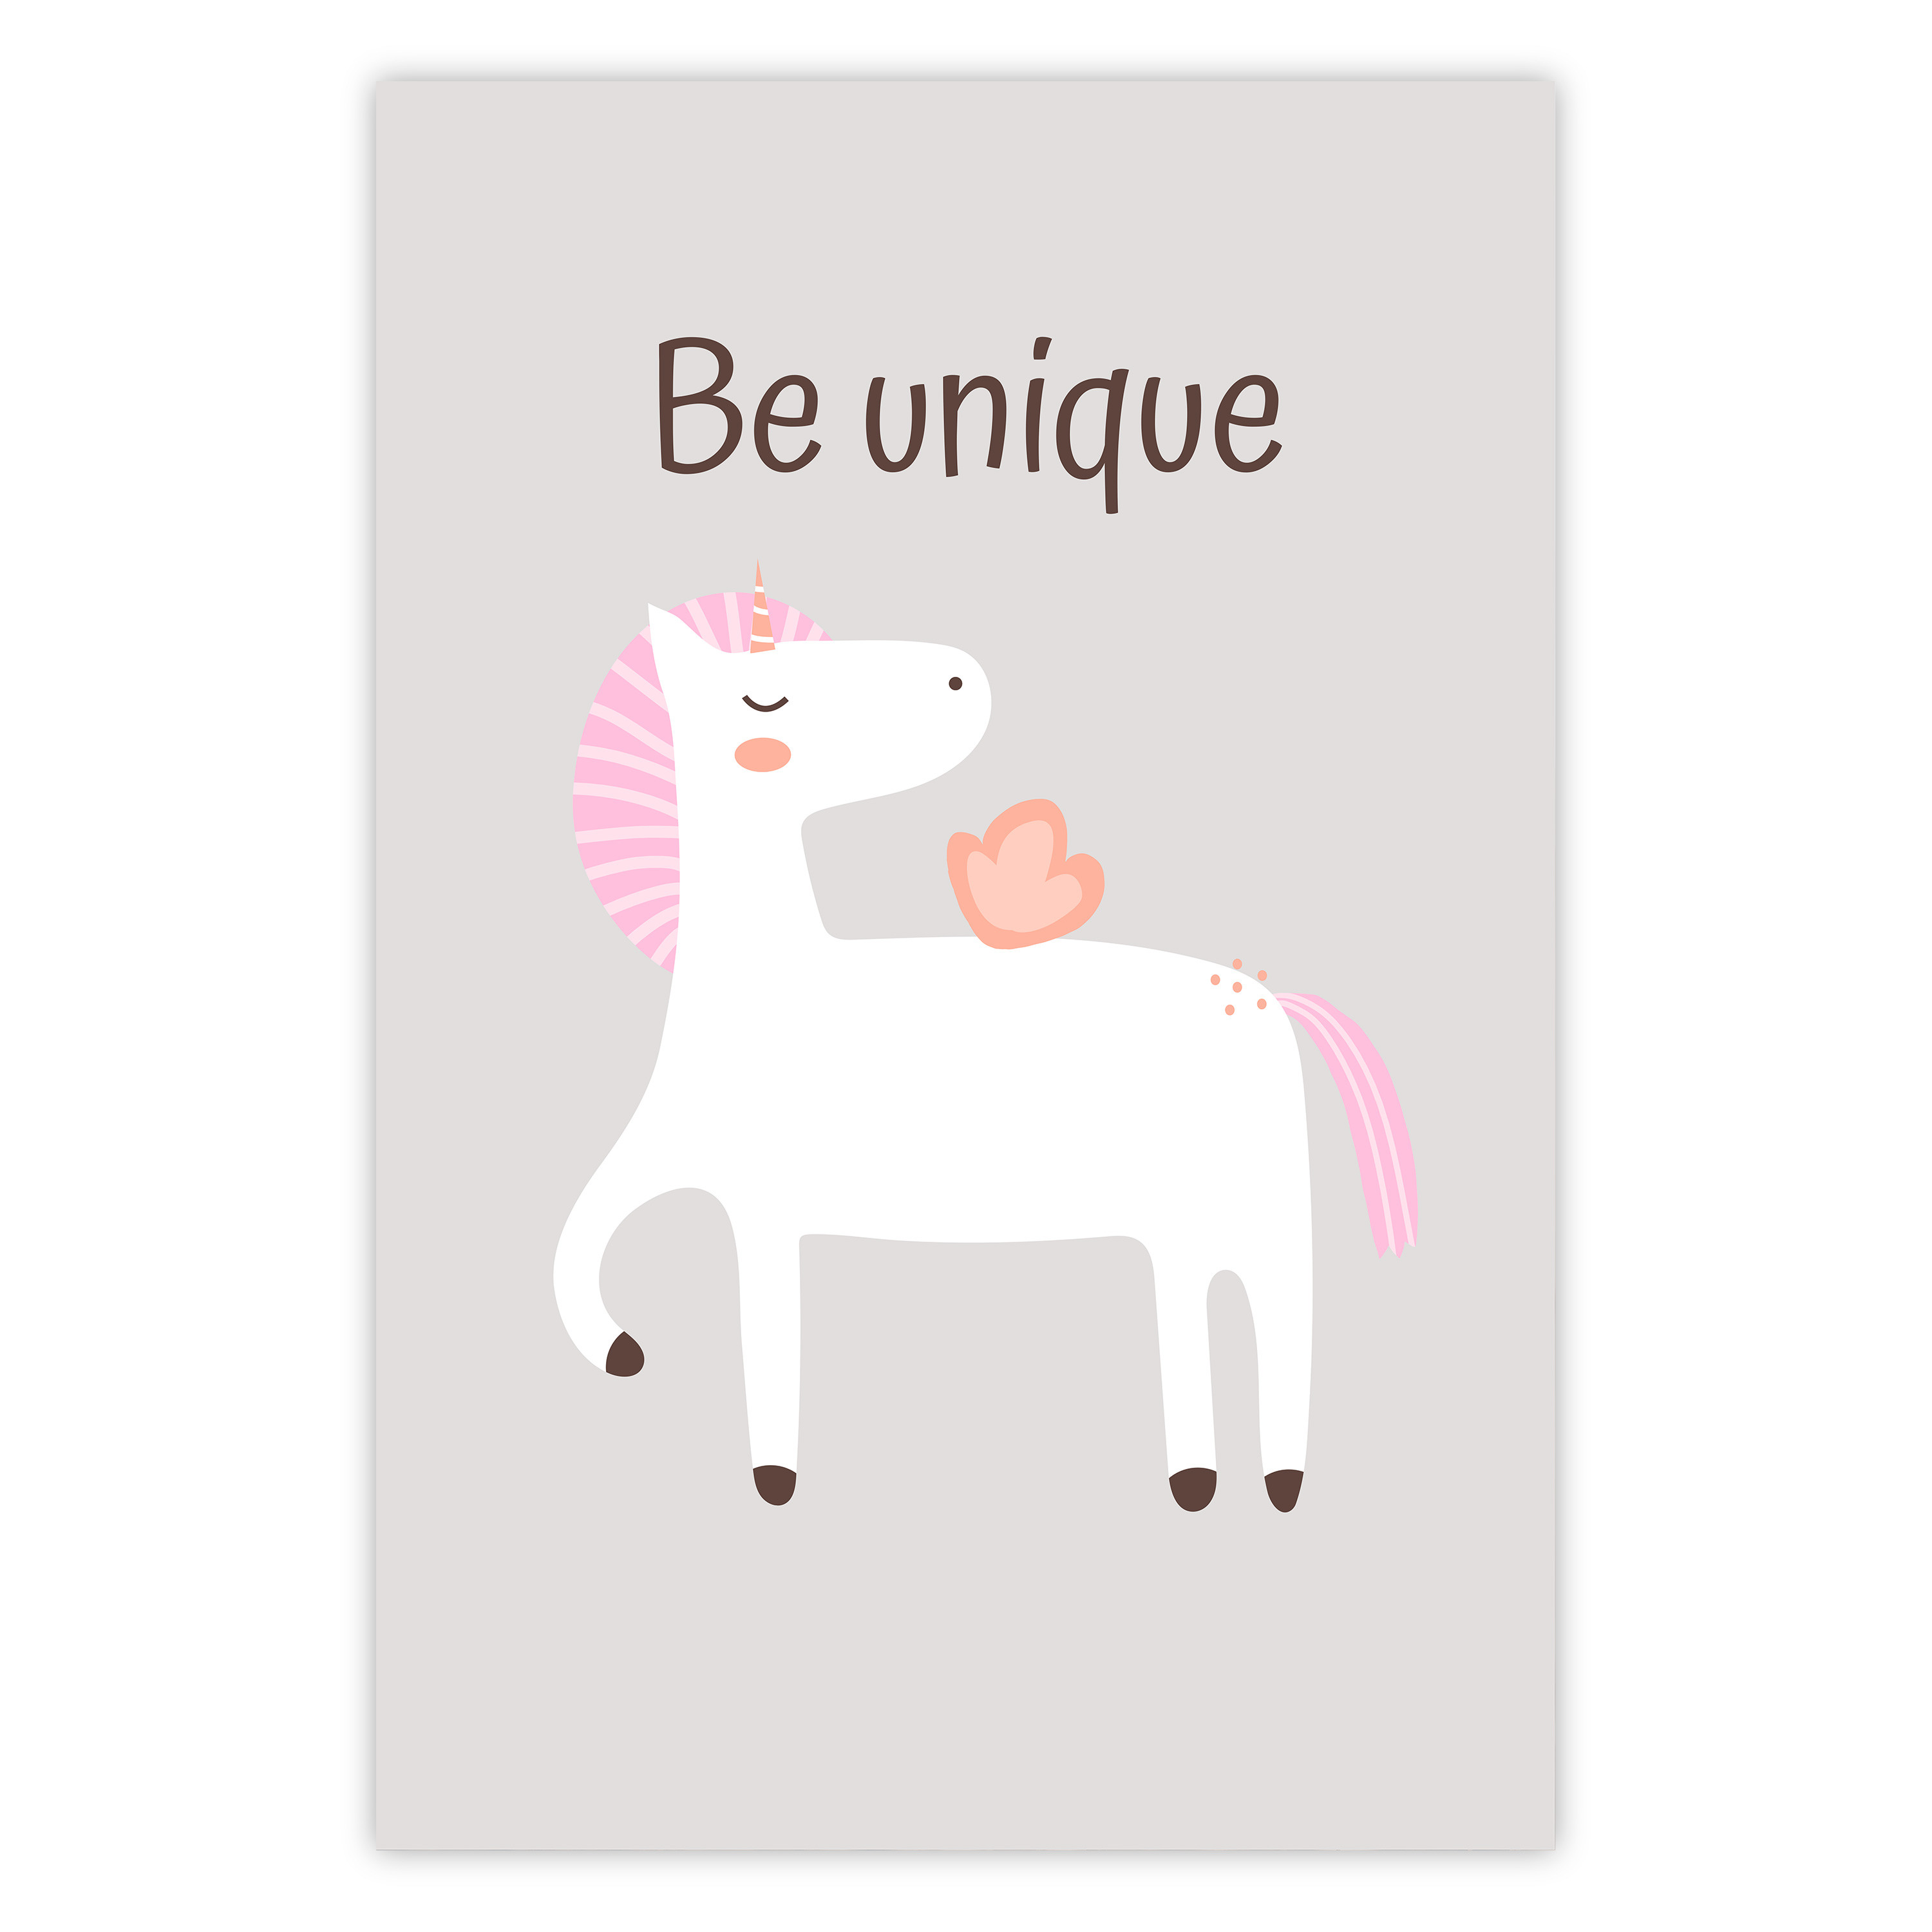 Wandposter Be Cheerful Motivating Poster Unique Slogan and Kids Unicorn for - a 